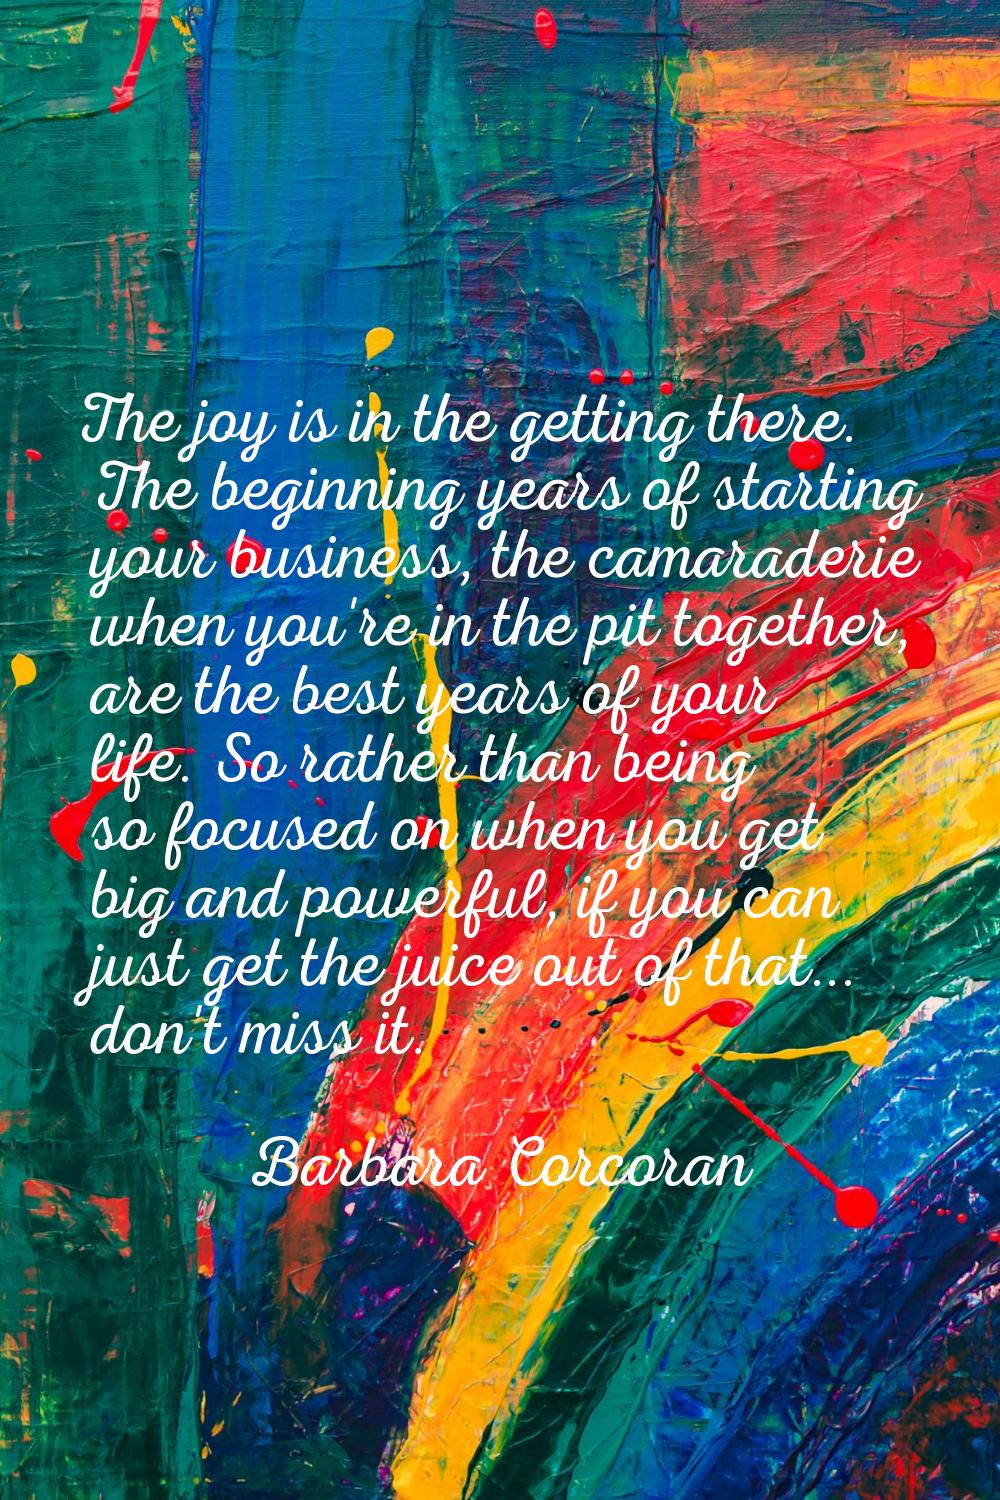 The joy is in the getting there. The beginning years of starting your business, the camaraderie whe